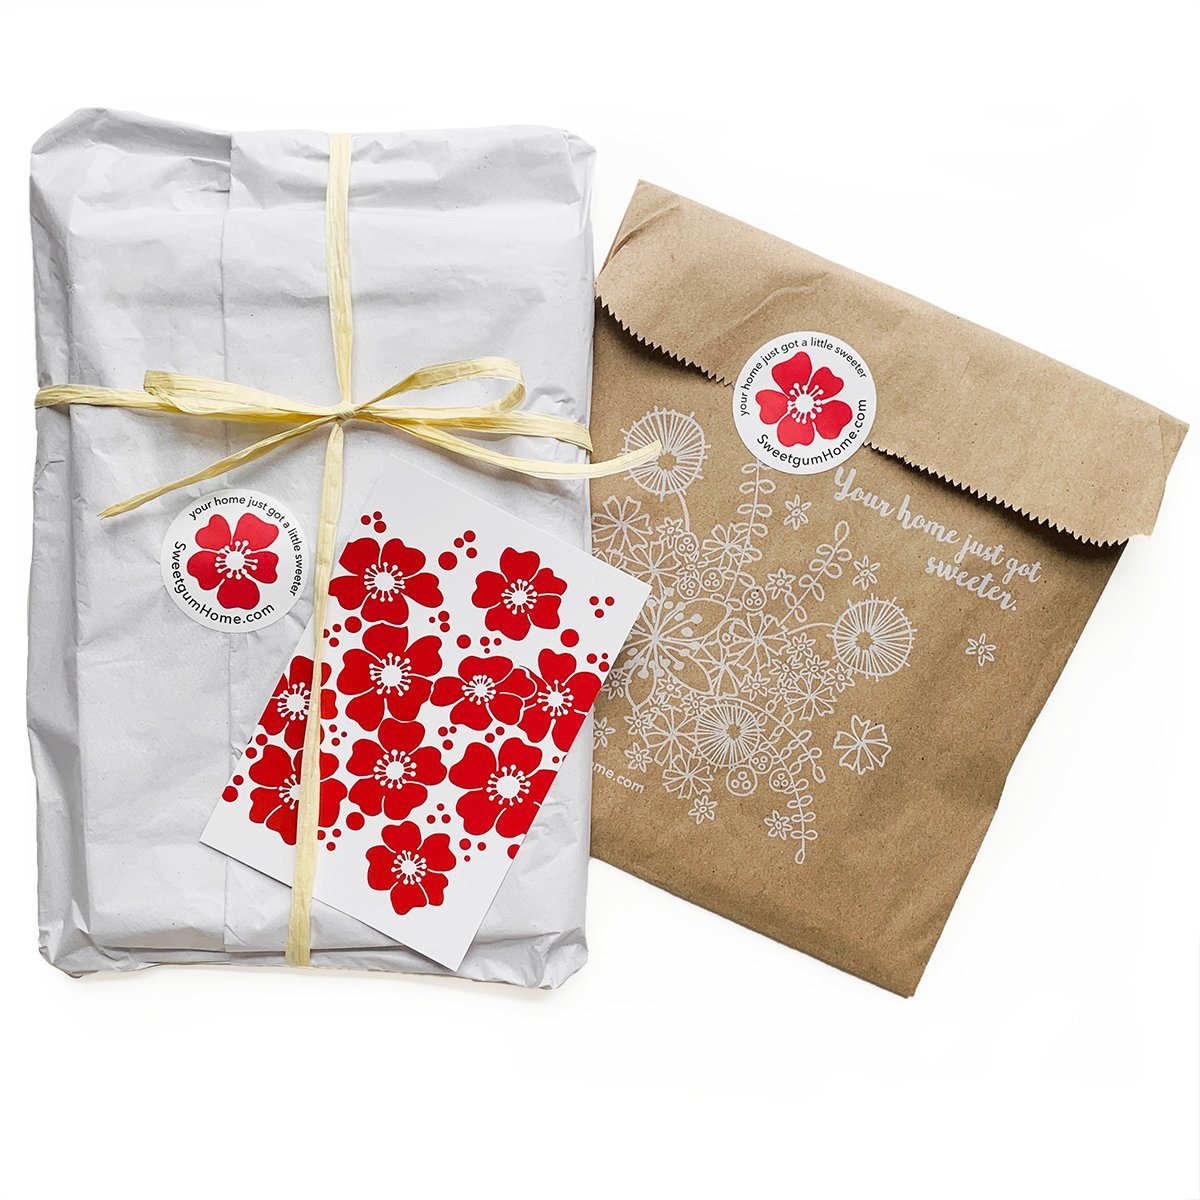 Gift Wrapping sweetgum textiles company, LLC 